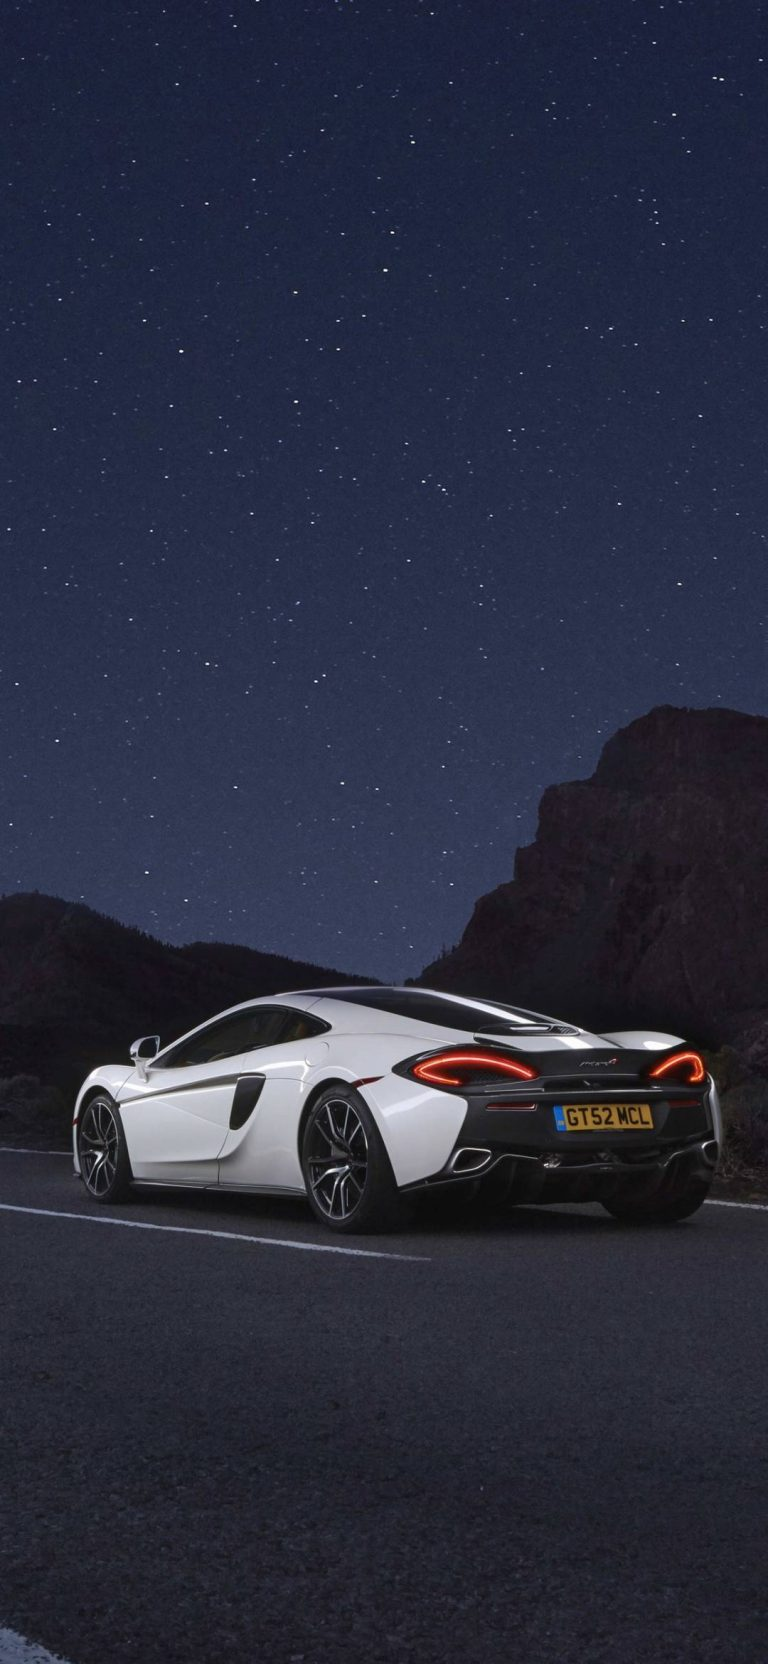 Car Background Wallpaper. Car background, Car iphone wallpaper, Luxury cars